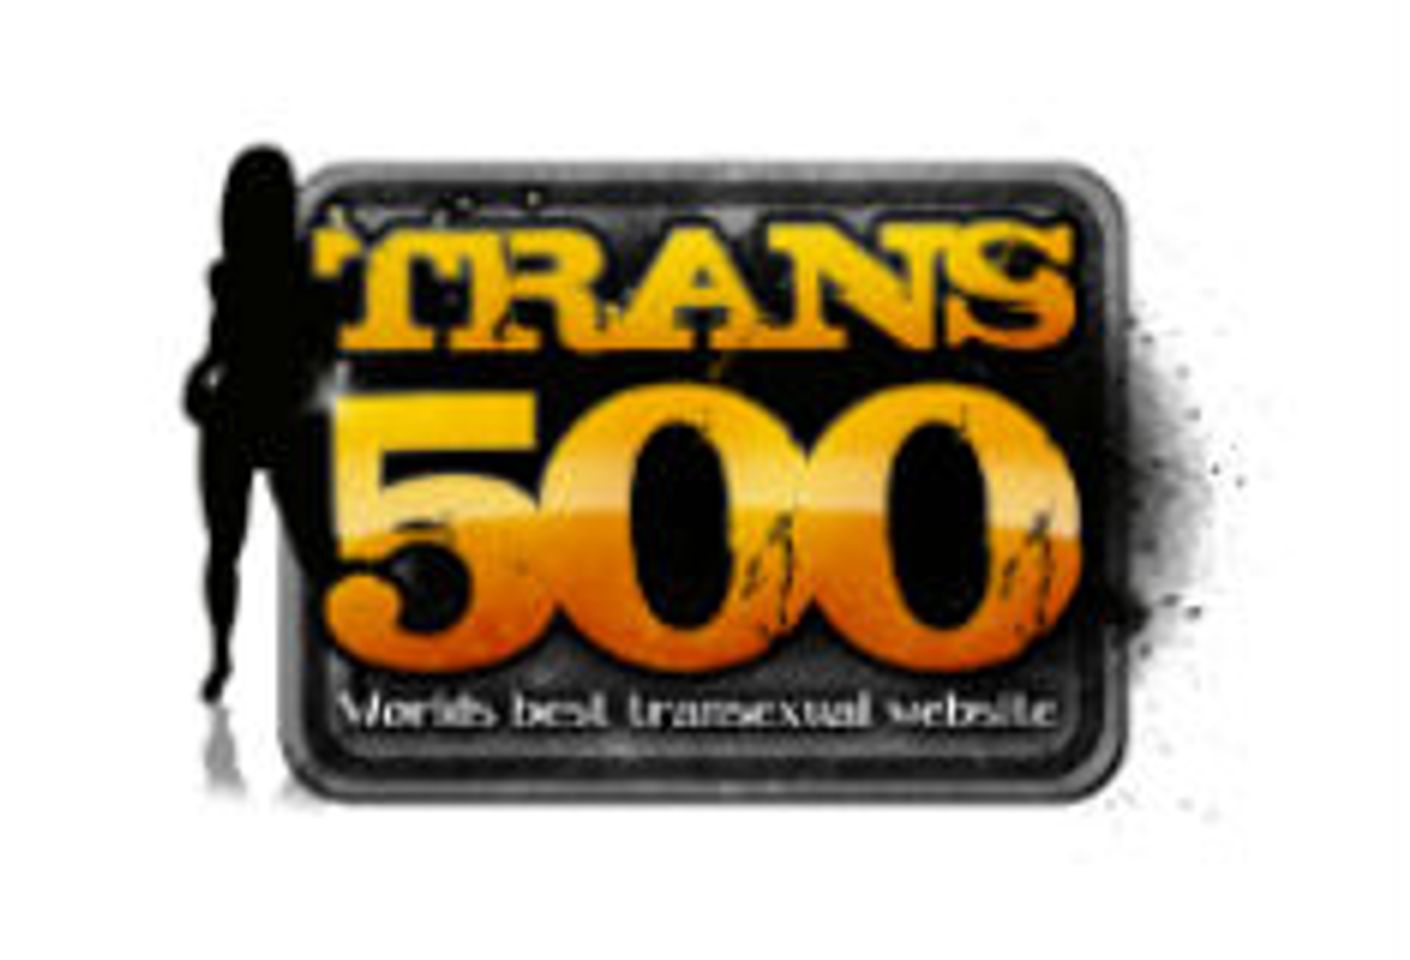 Trans 500 Takes Home AVN Award for Best Transsexual Release